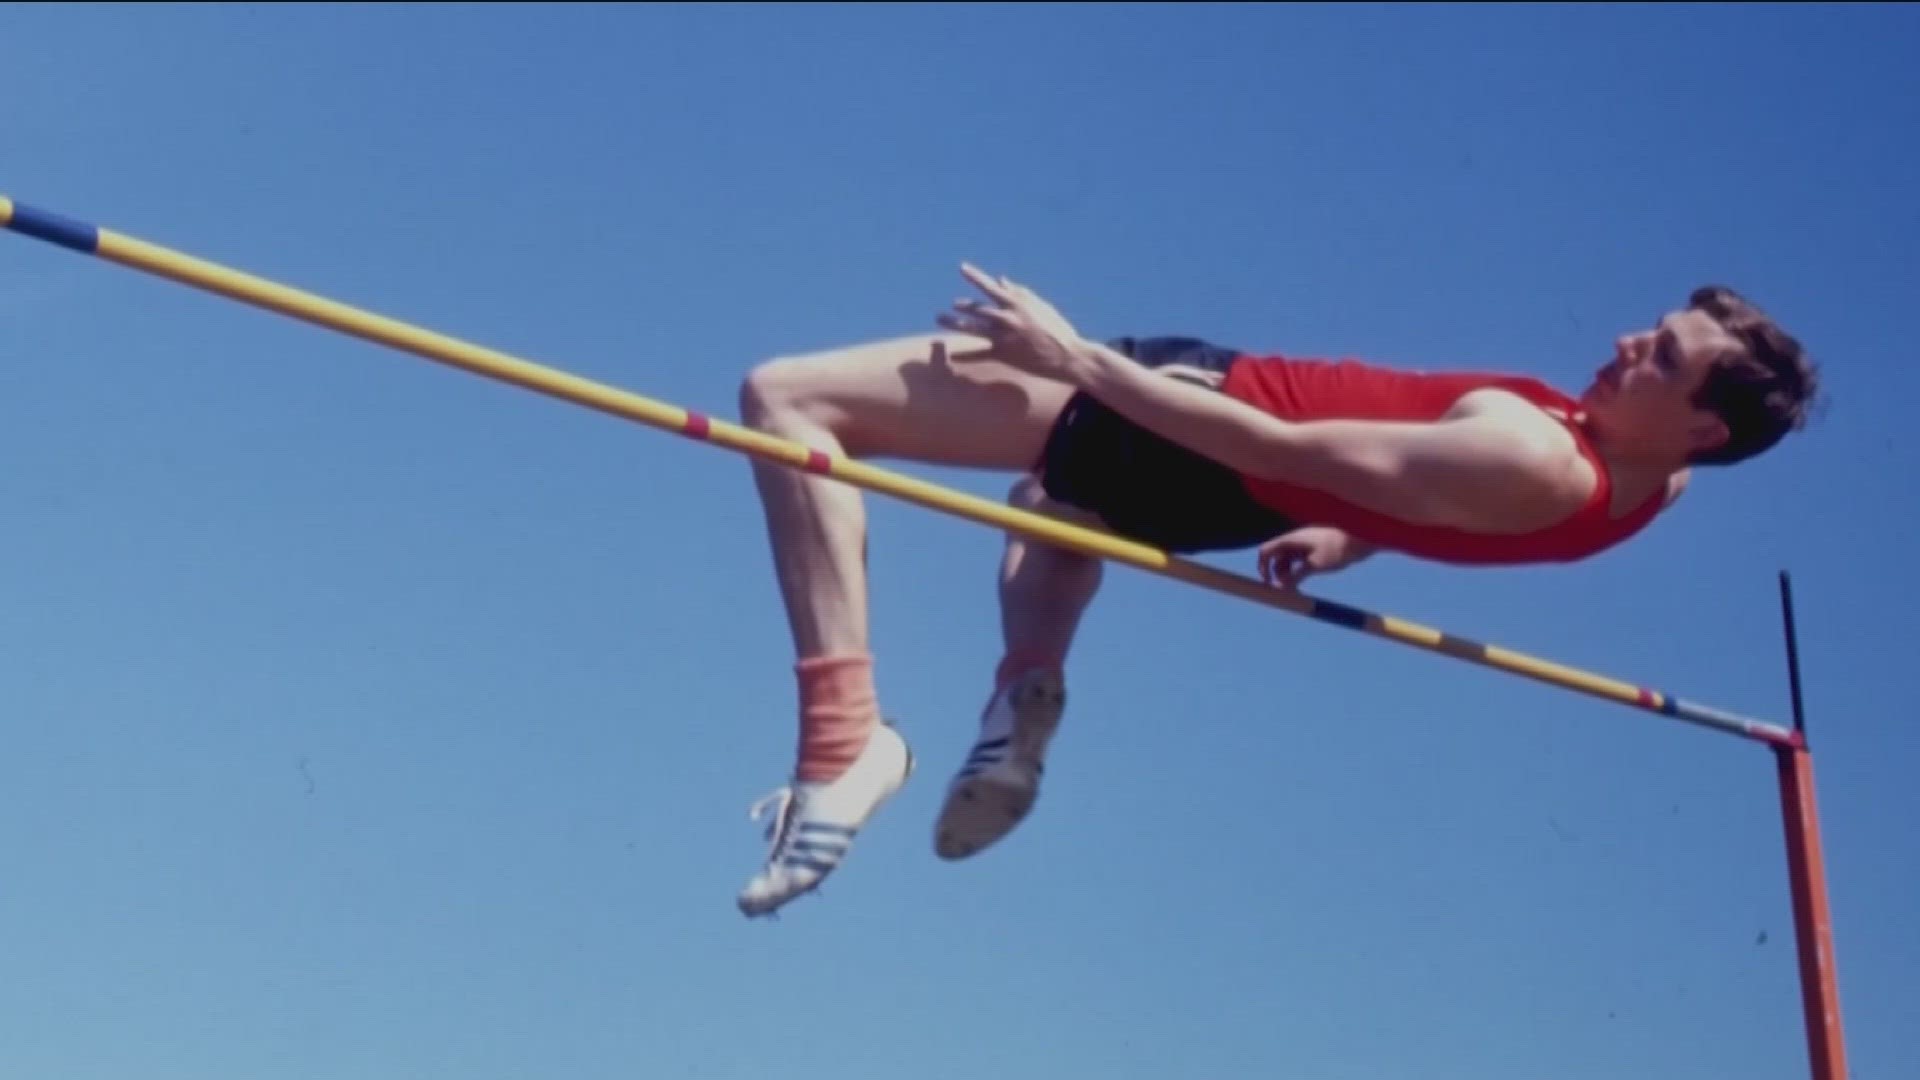 Known for revolutionizing the high jump, Fosbury's legacy in track and field spans generations. The Oregon-born Olympic legend lived in Idaho for decades.